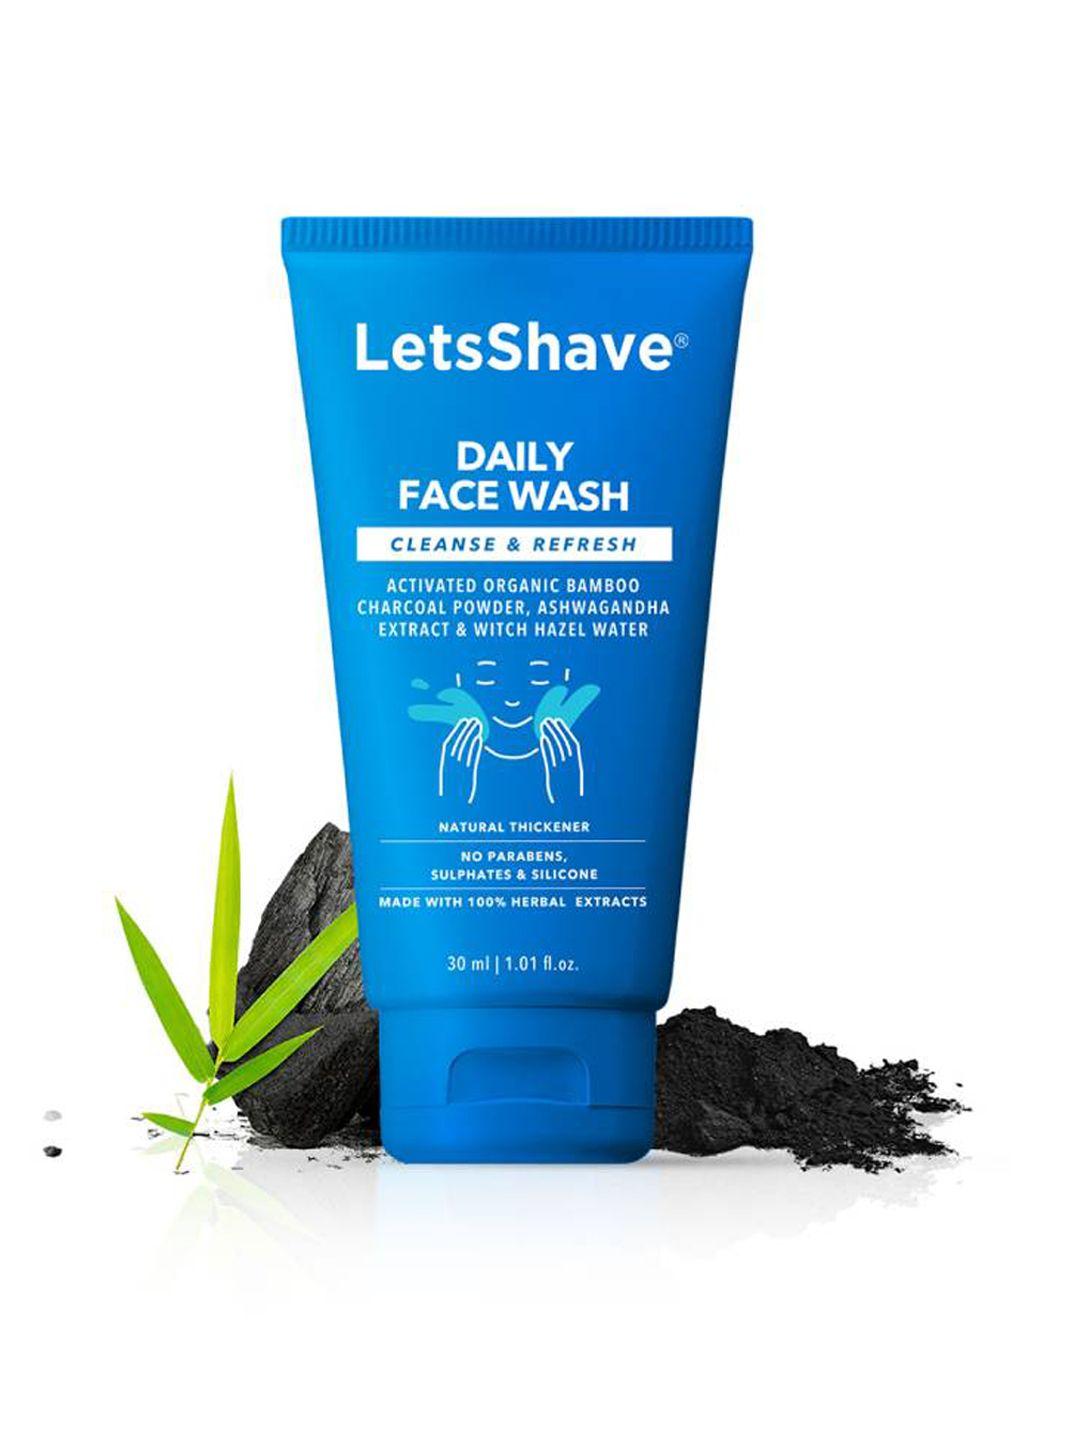 letsshave daily face wash cleanse & refresh - 30ml